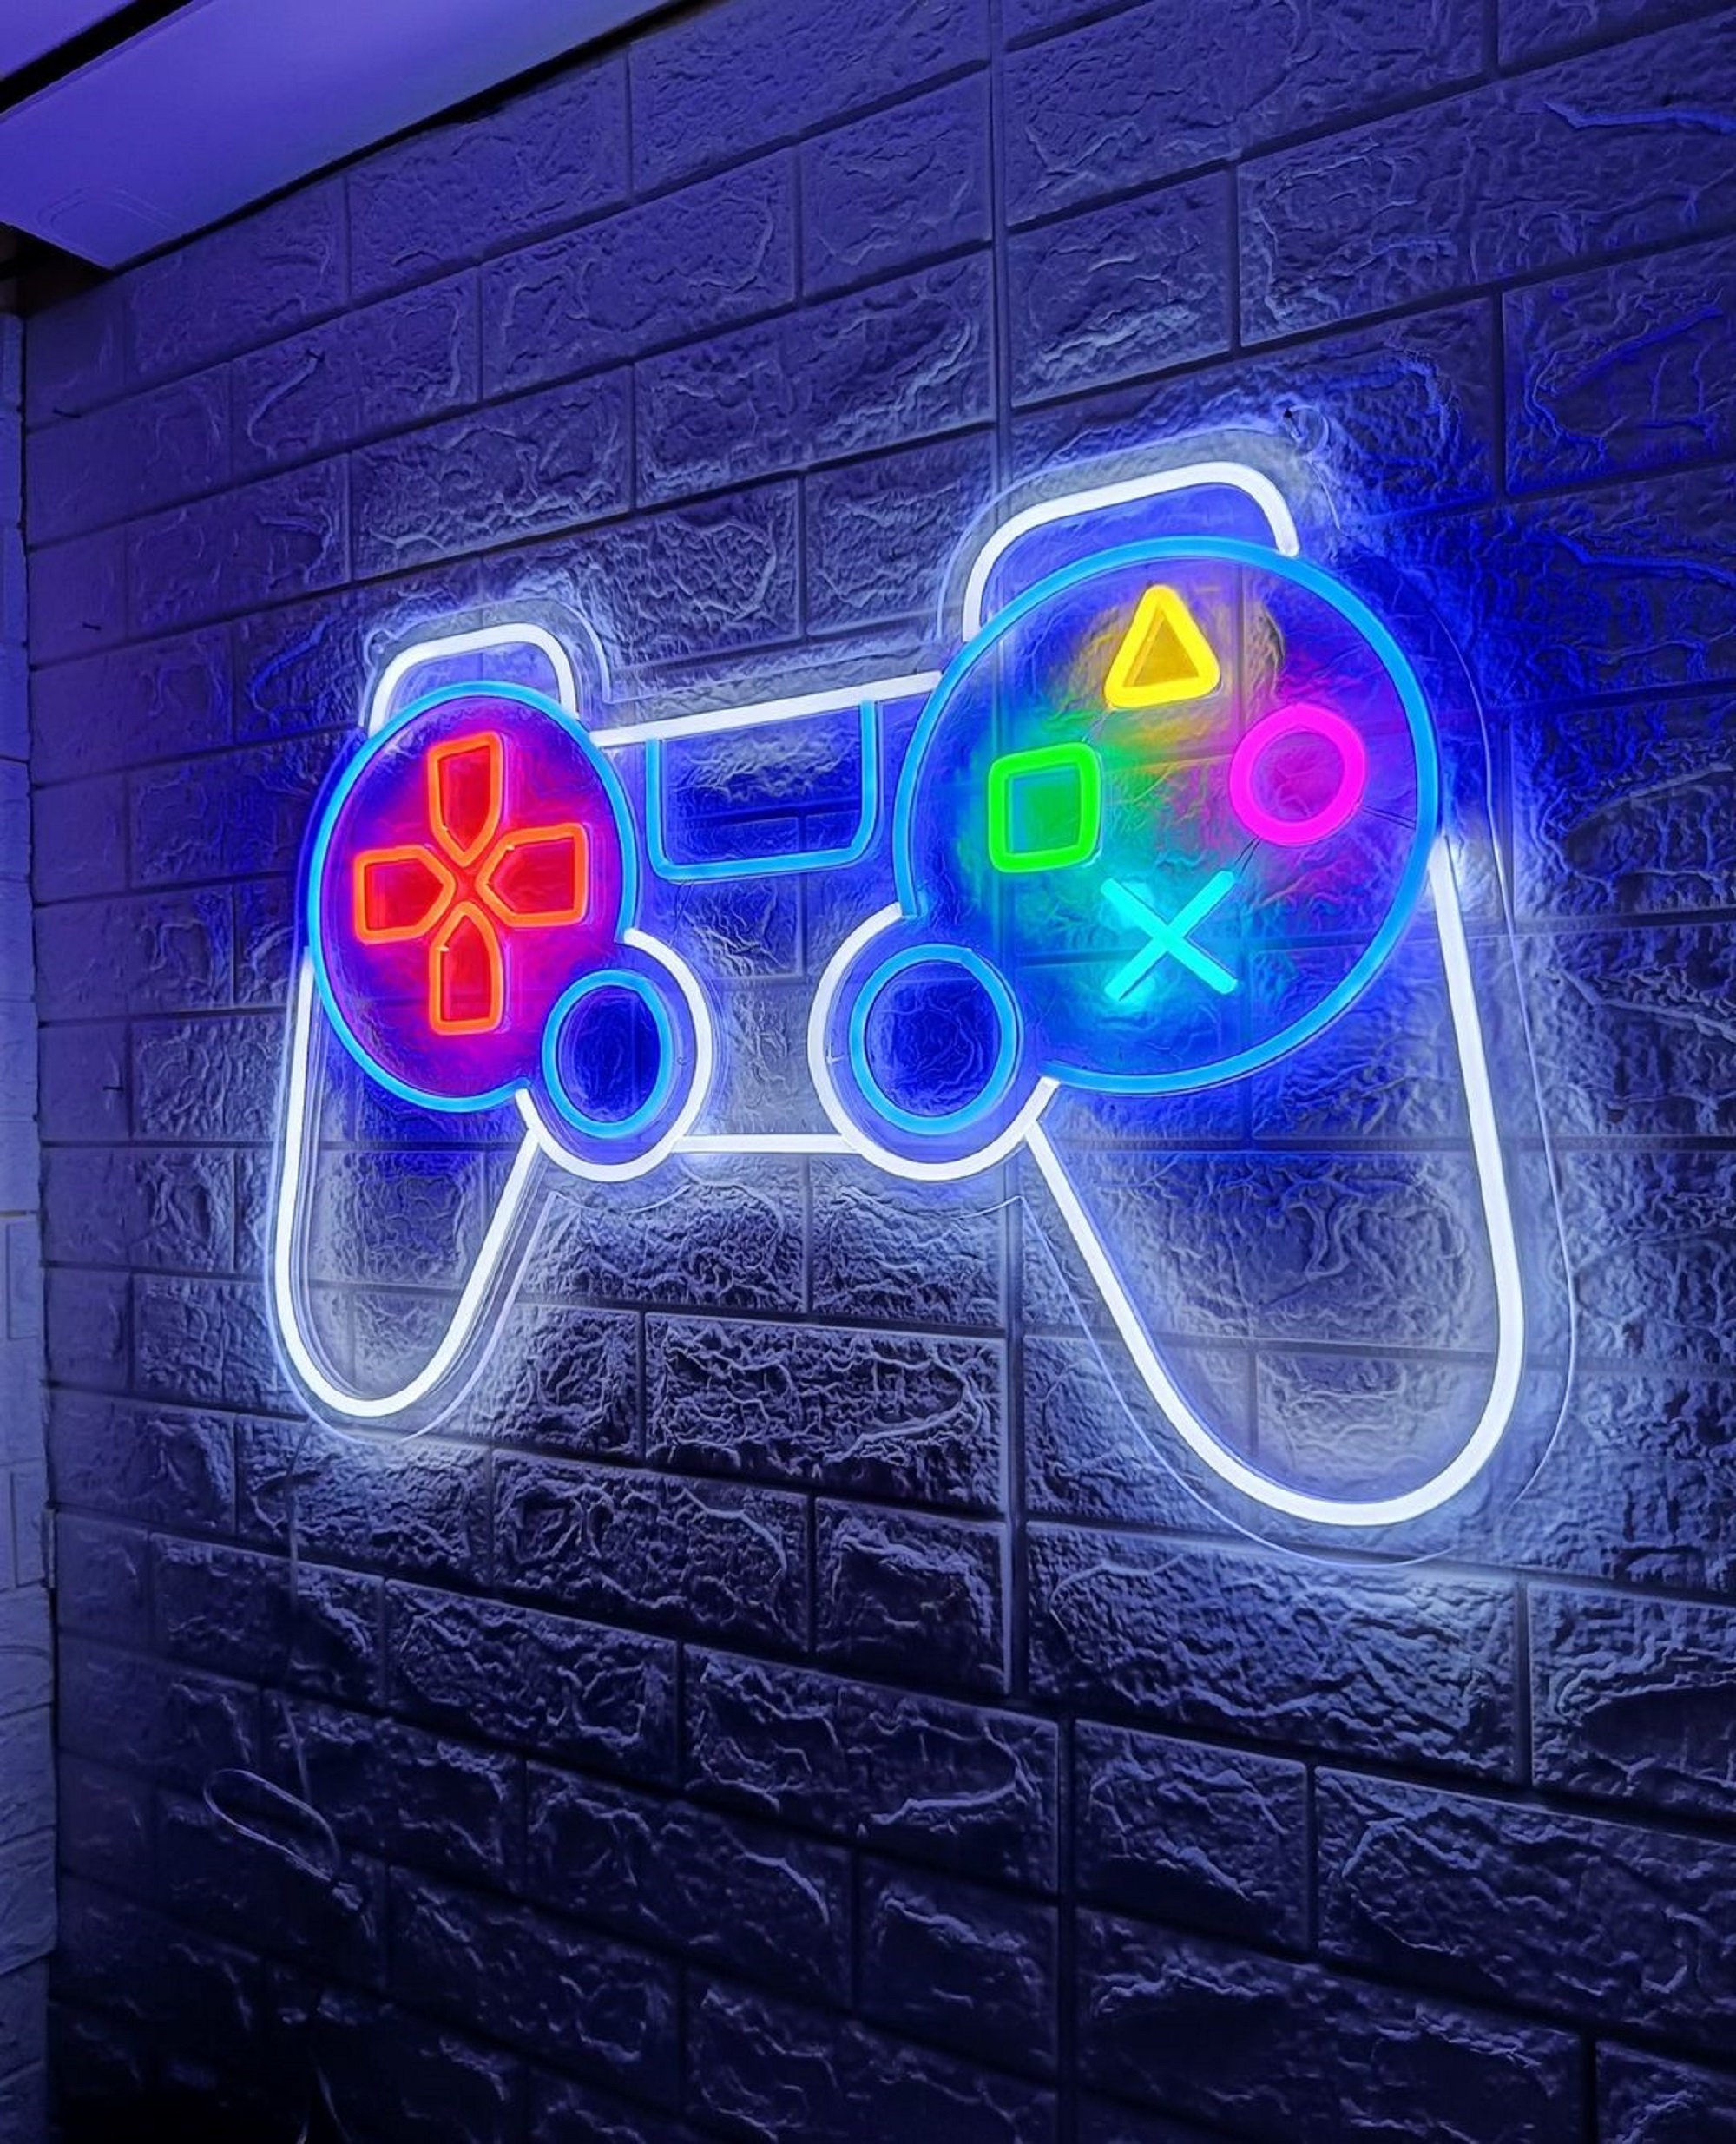 1pc LED Gaming Neon Sign Light, Brightness Adjustable Game Room Decor Wall  Sign, Bedroom Video Game Battle Station Game Room Decor, USB Powered